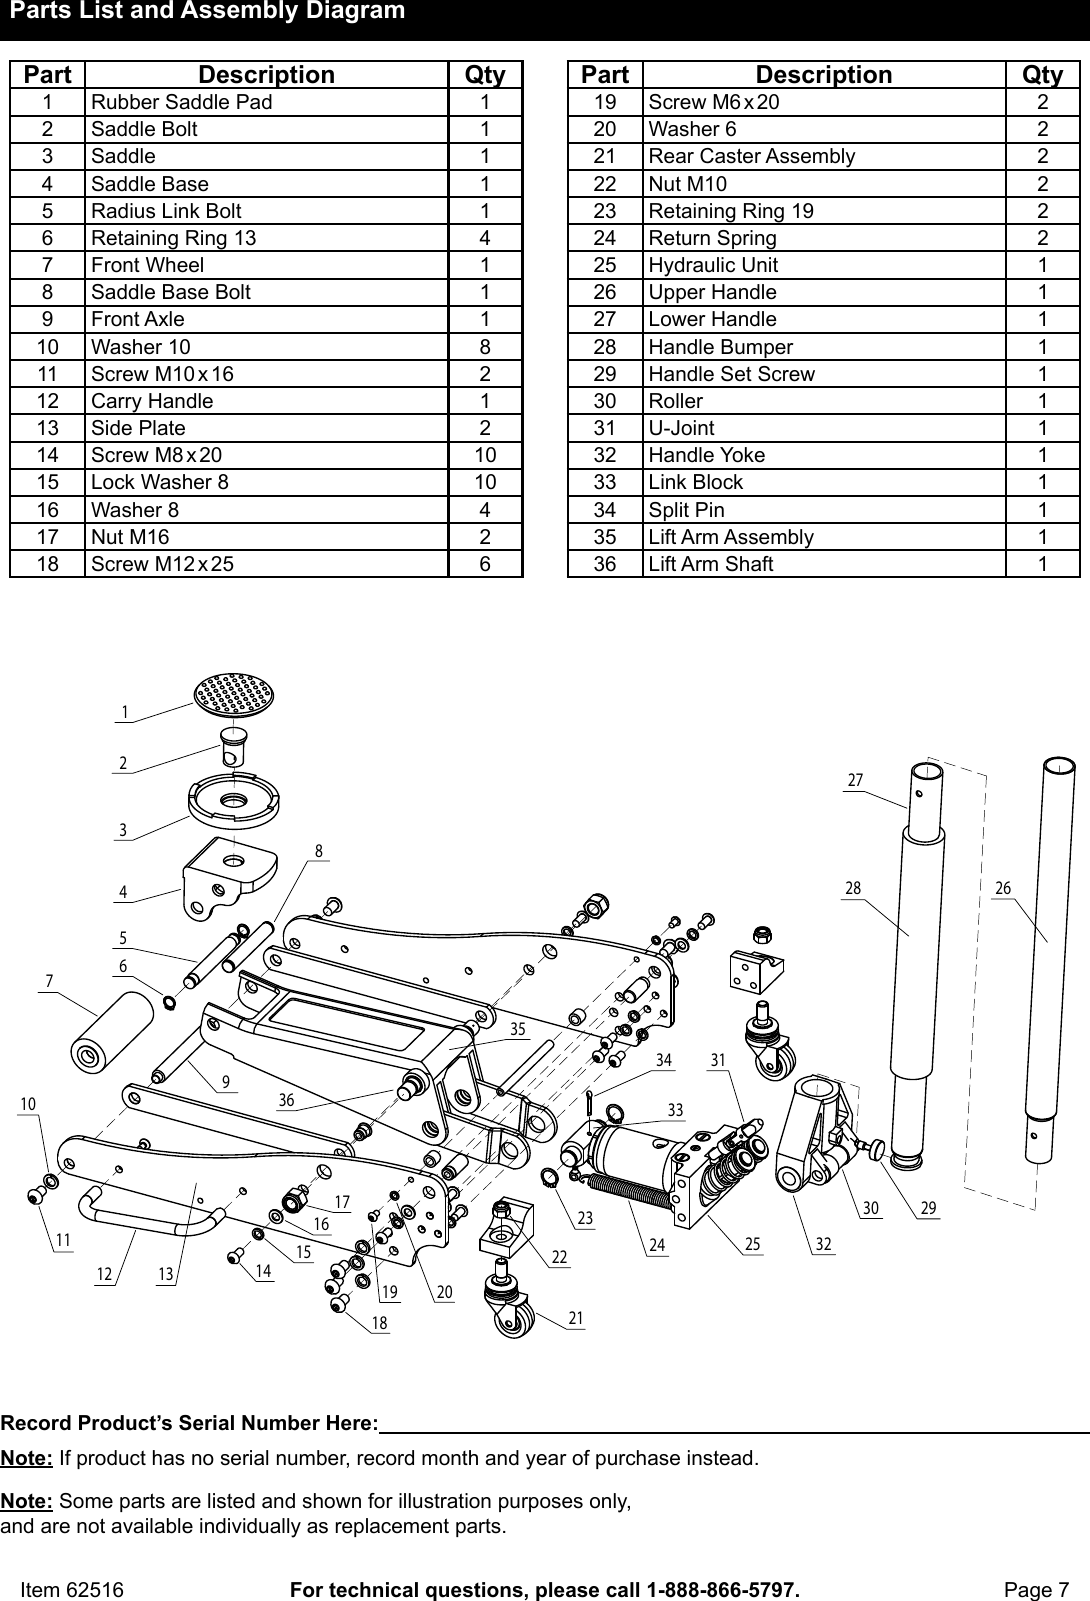 Page 7 of 8 - Manual For The 62516 1.5 Ton Compact Aluminum Racing Floor Jack With Rapid Pump®